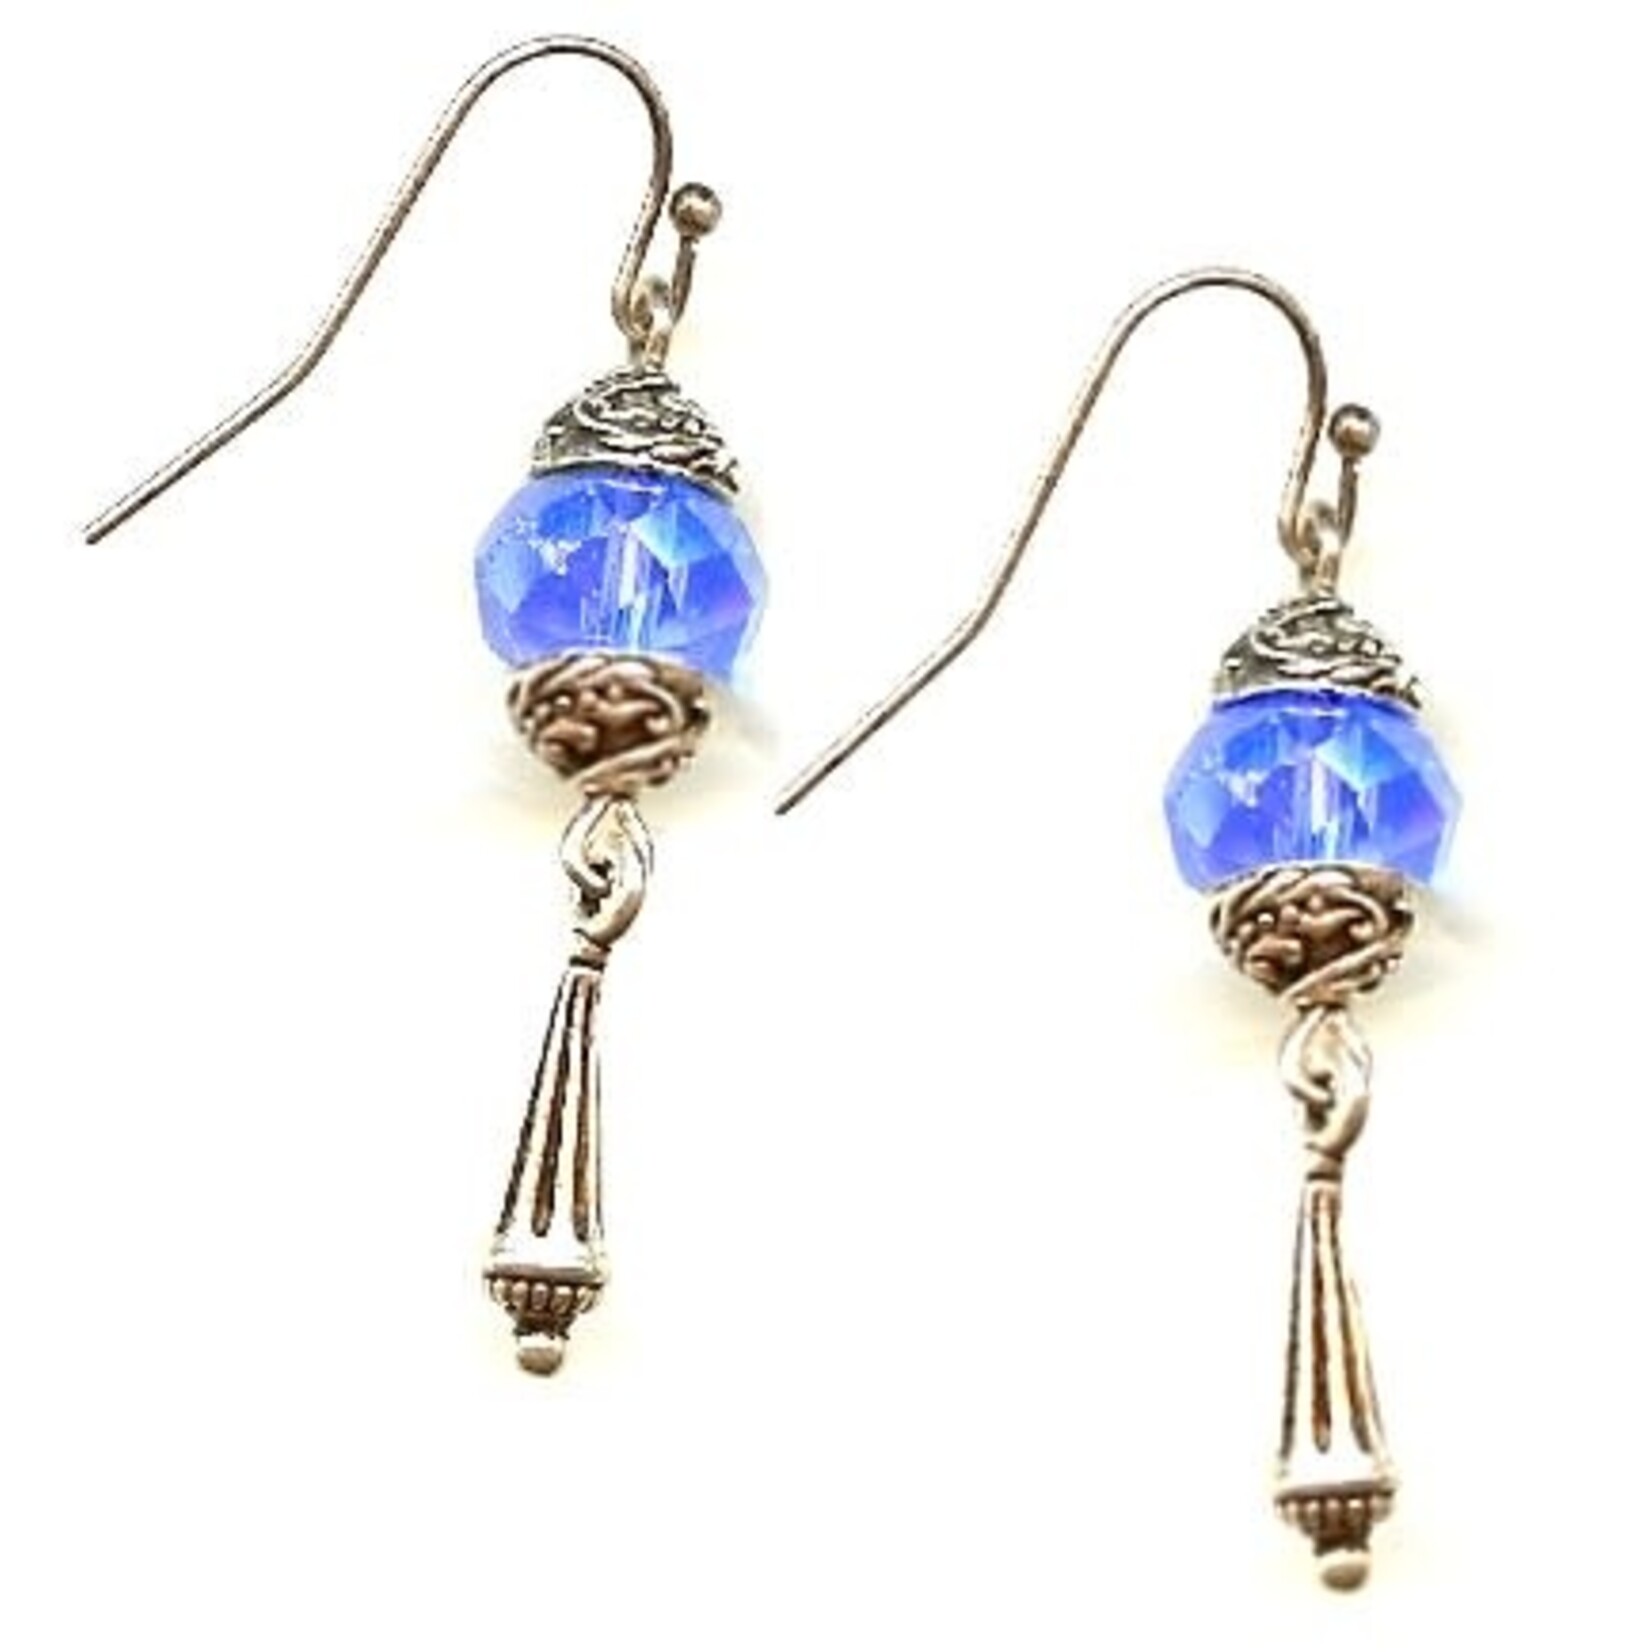 Bead Inspirations Miss Ivy Blue Earring Kit